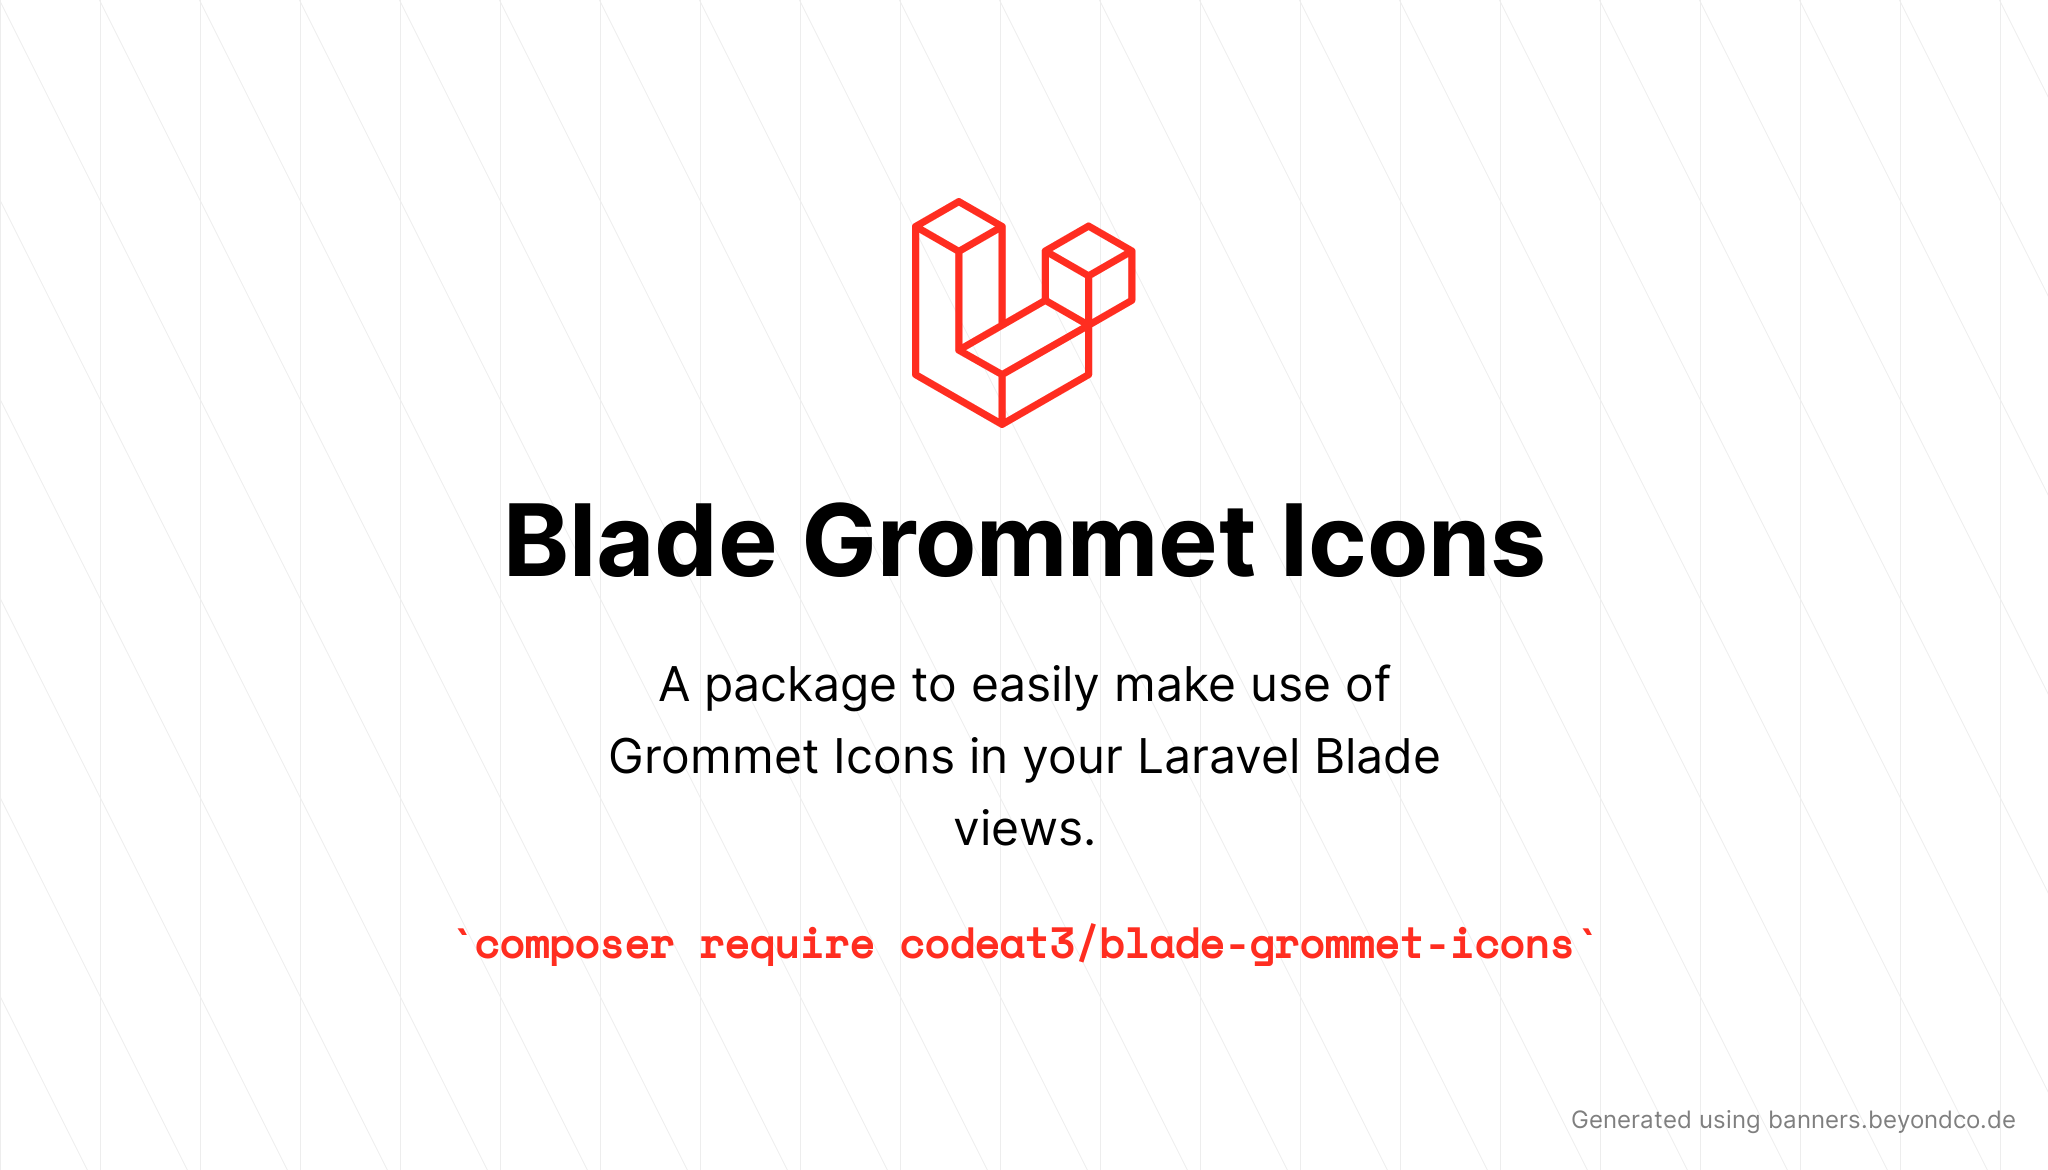 socialcard-blade-grommet-icons.png